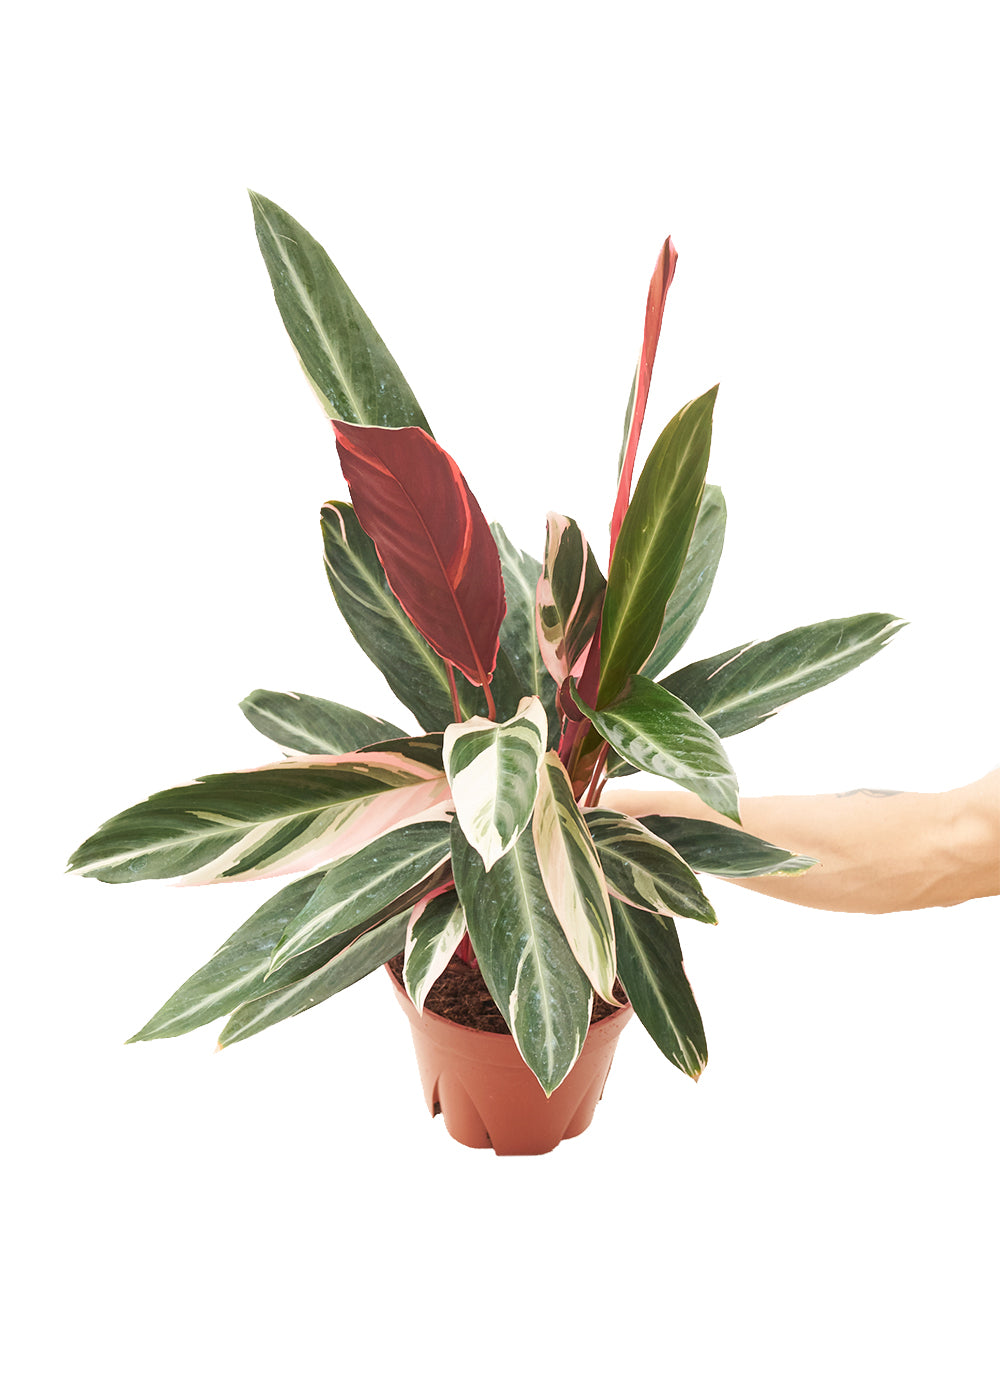 Large size Stromanthe Triostar Plant in a growers pot with a white background with a hand holding the pot showing the top view